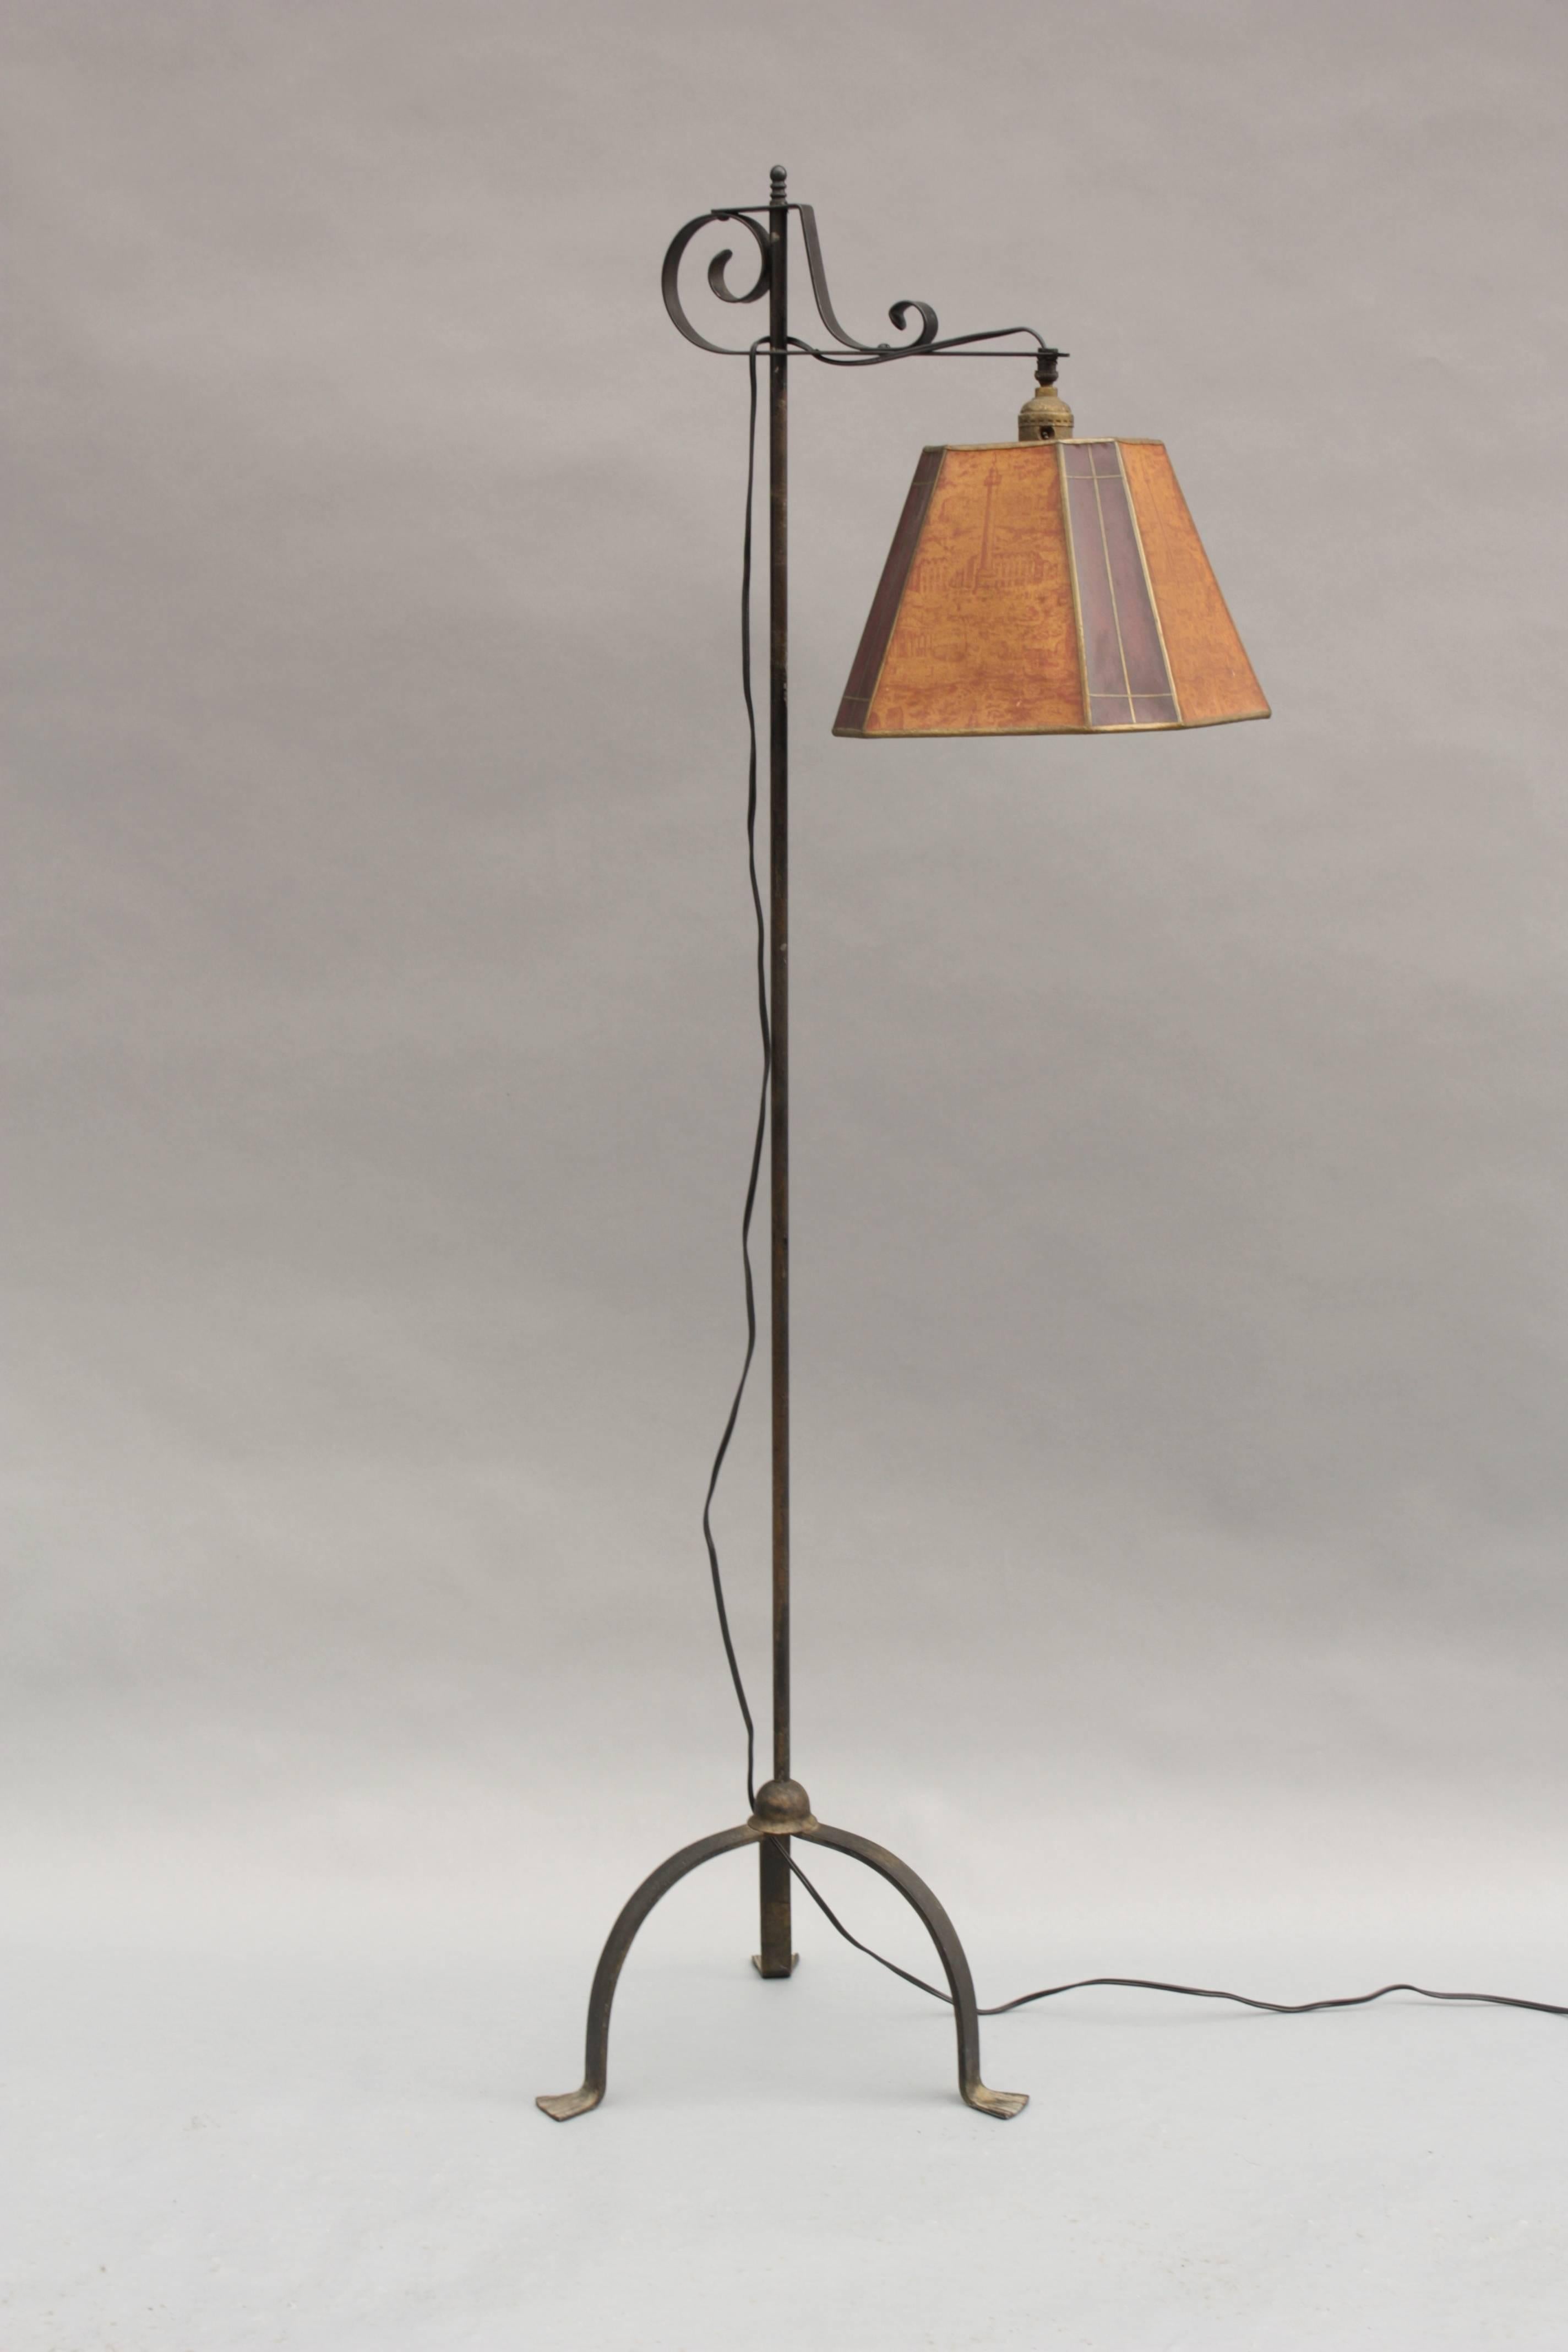 Iron floor lamp with adjustable paper shade, circa 1930s. Measures: 55.63